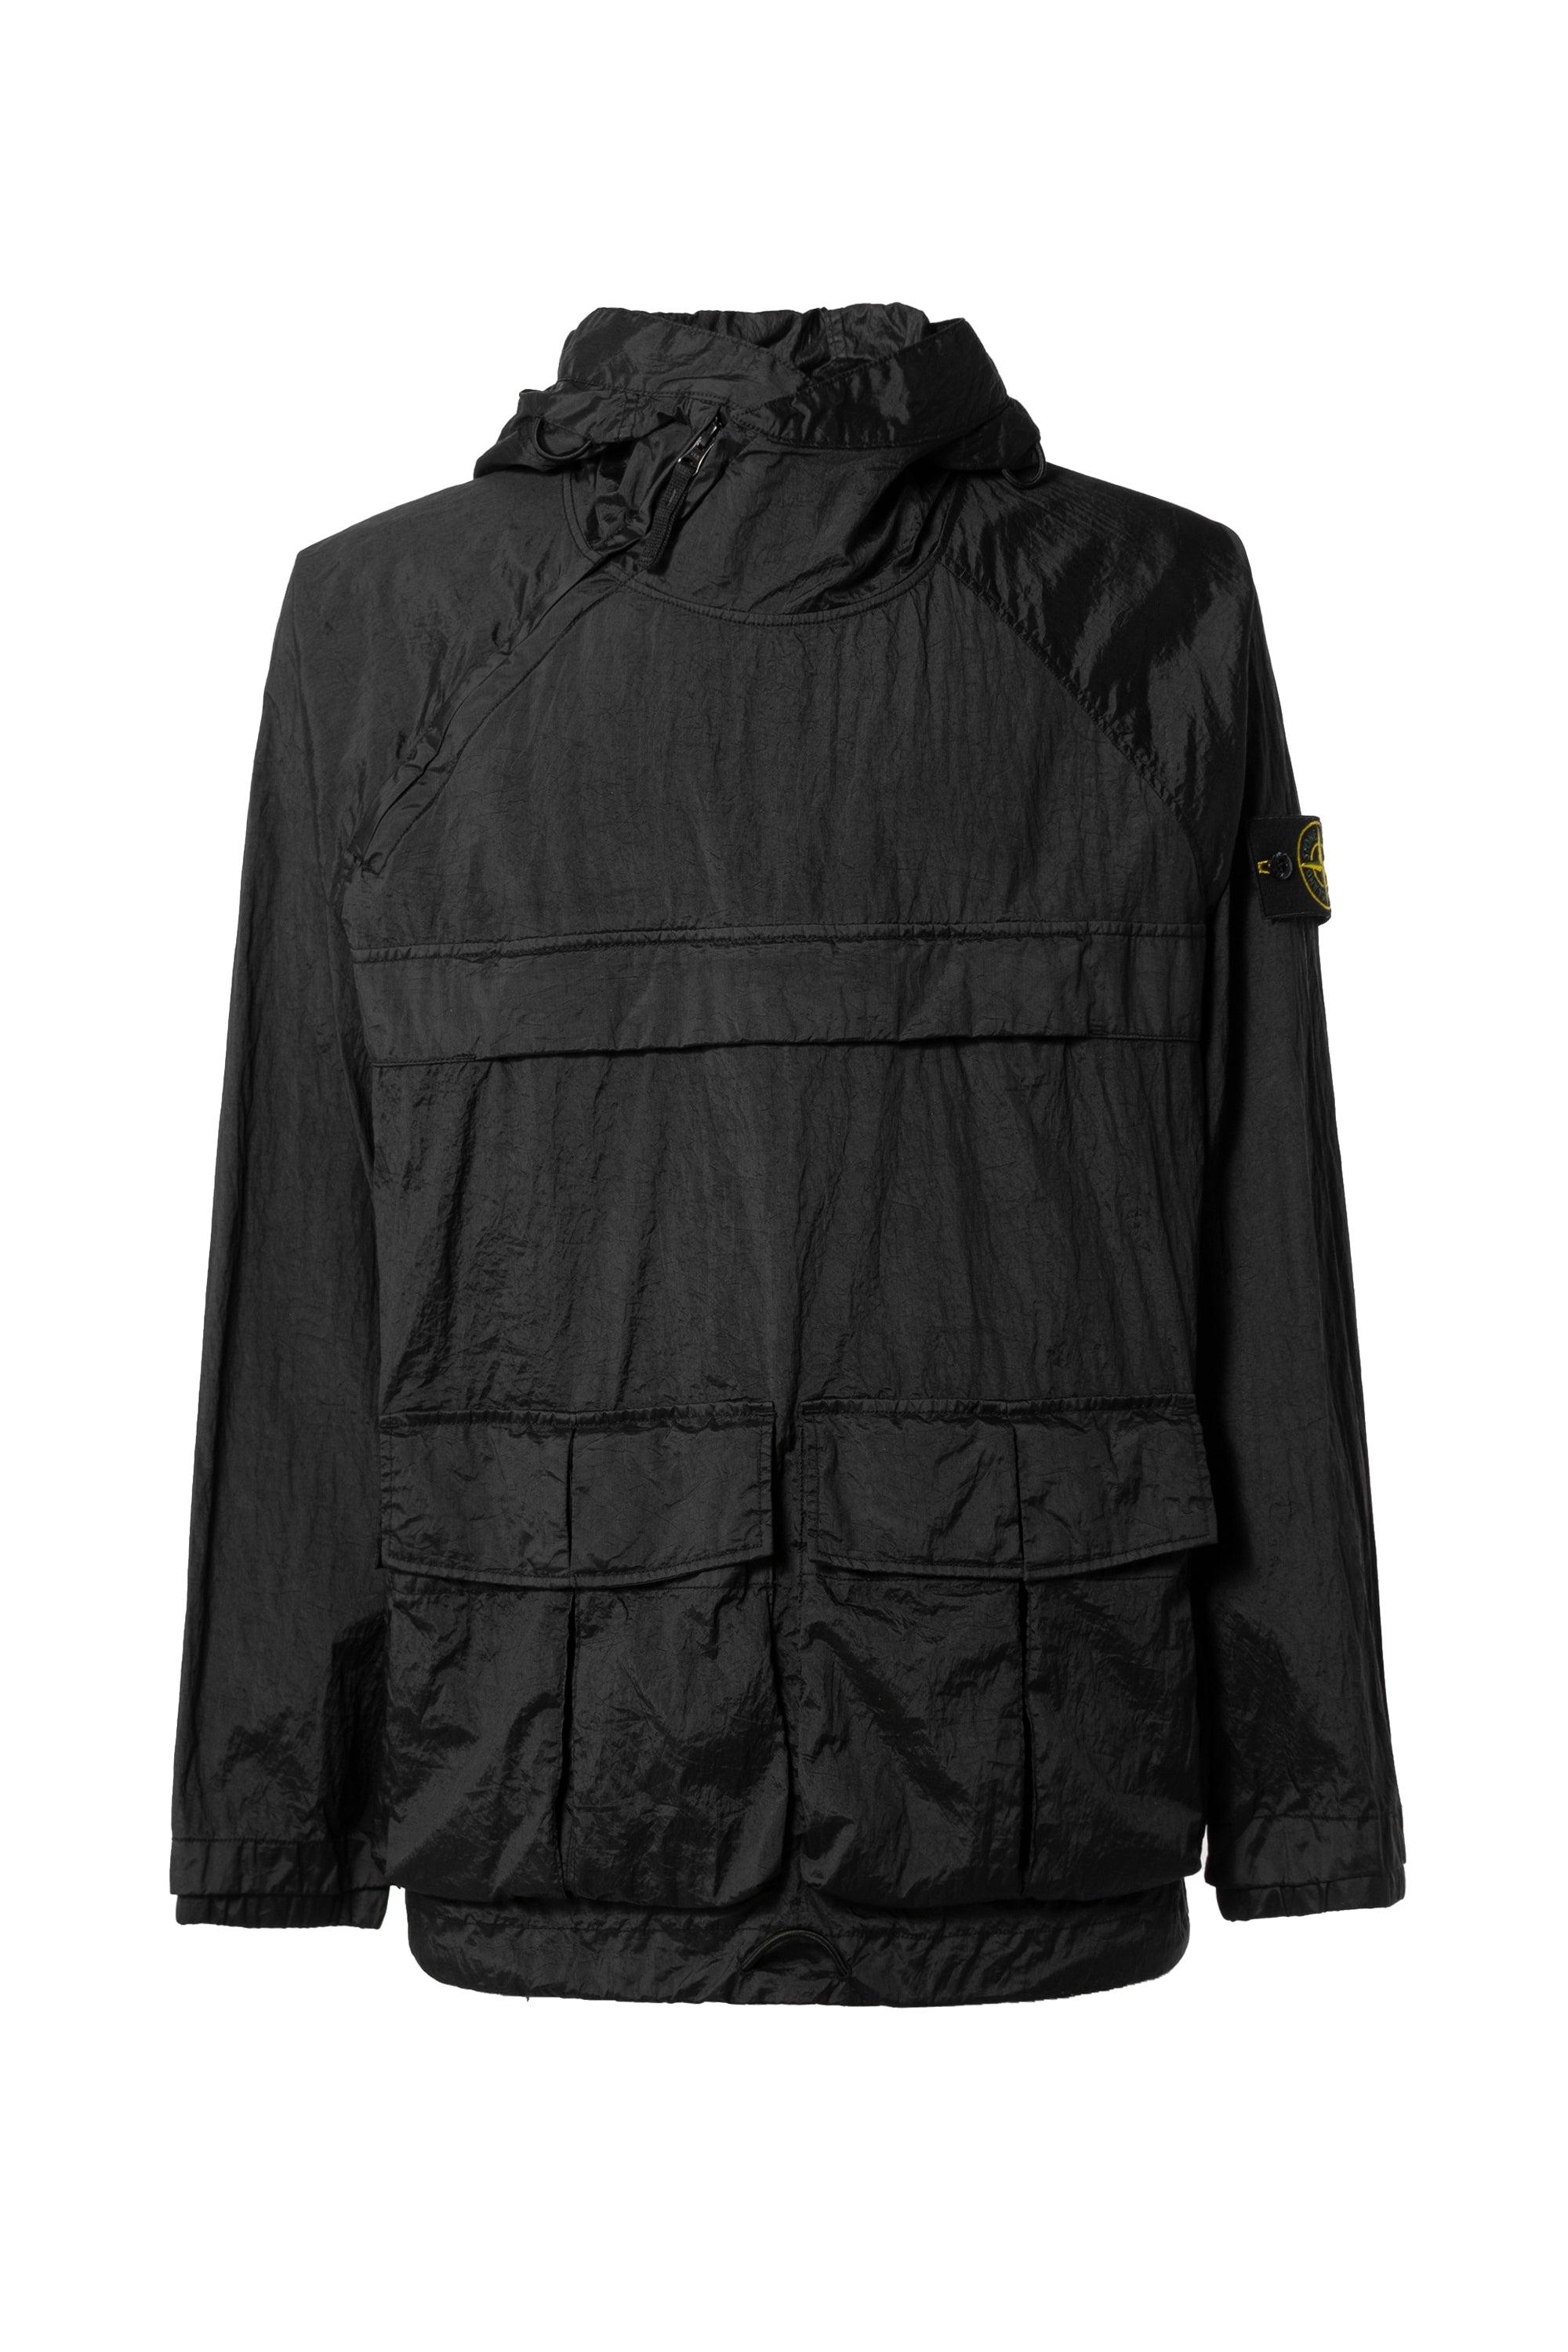 Stone Island Pullover Jacket in Black for Men | Lyst